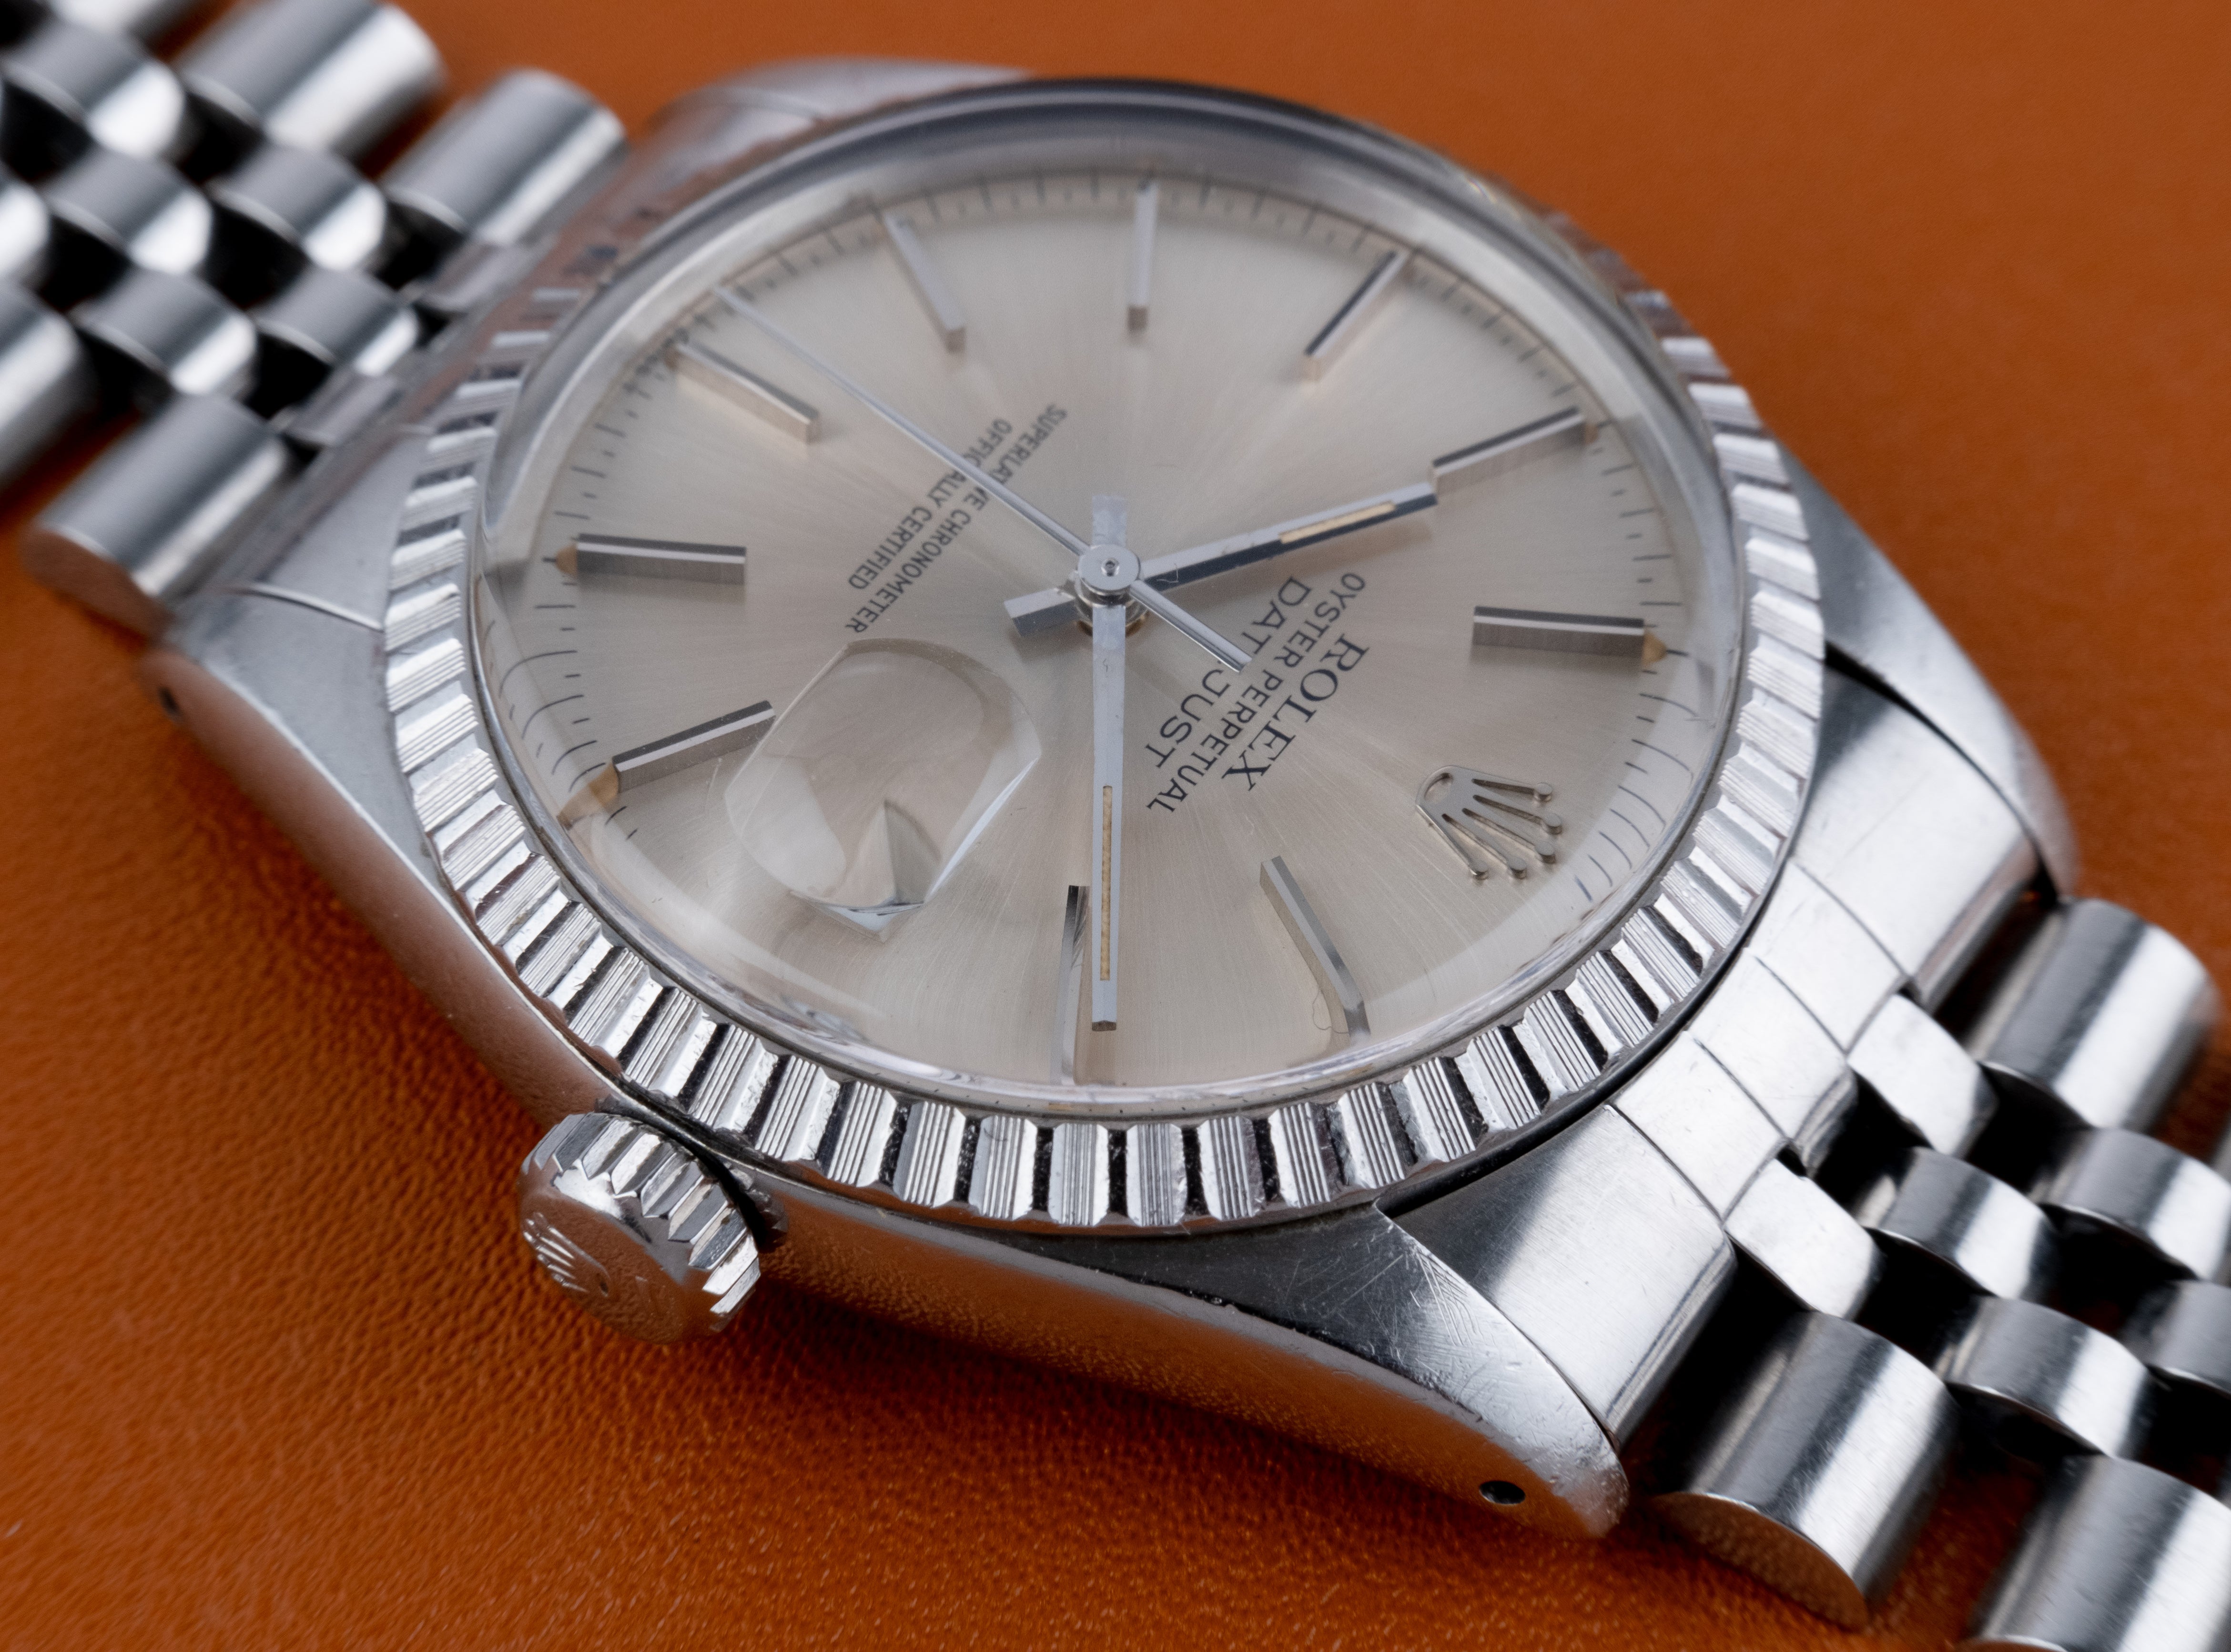 ROLEX Oyster Perpetual Datejust Ref. 16030 Box & Papers (1979)